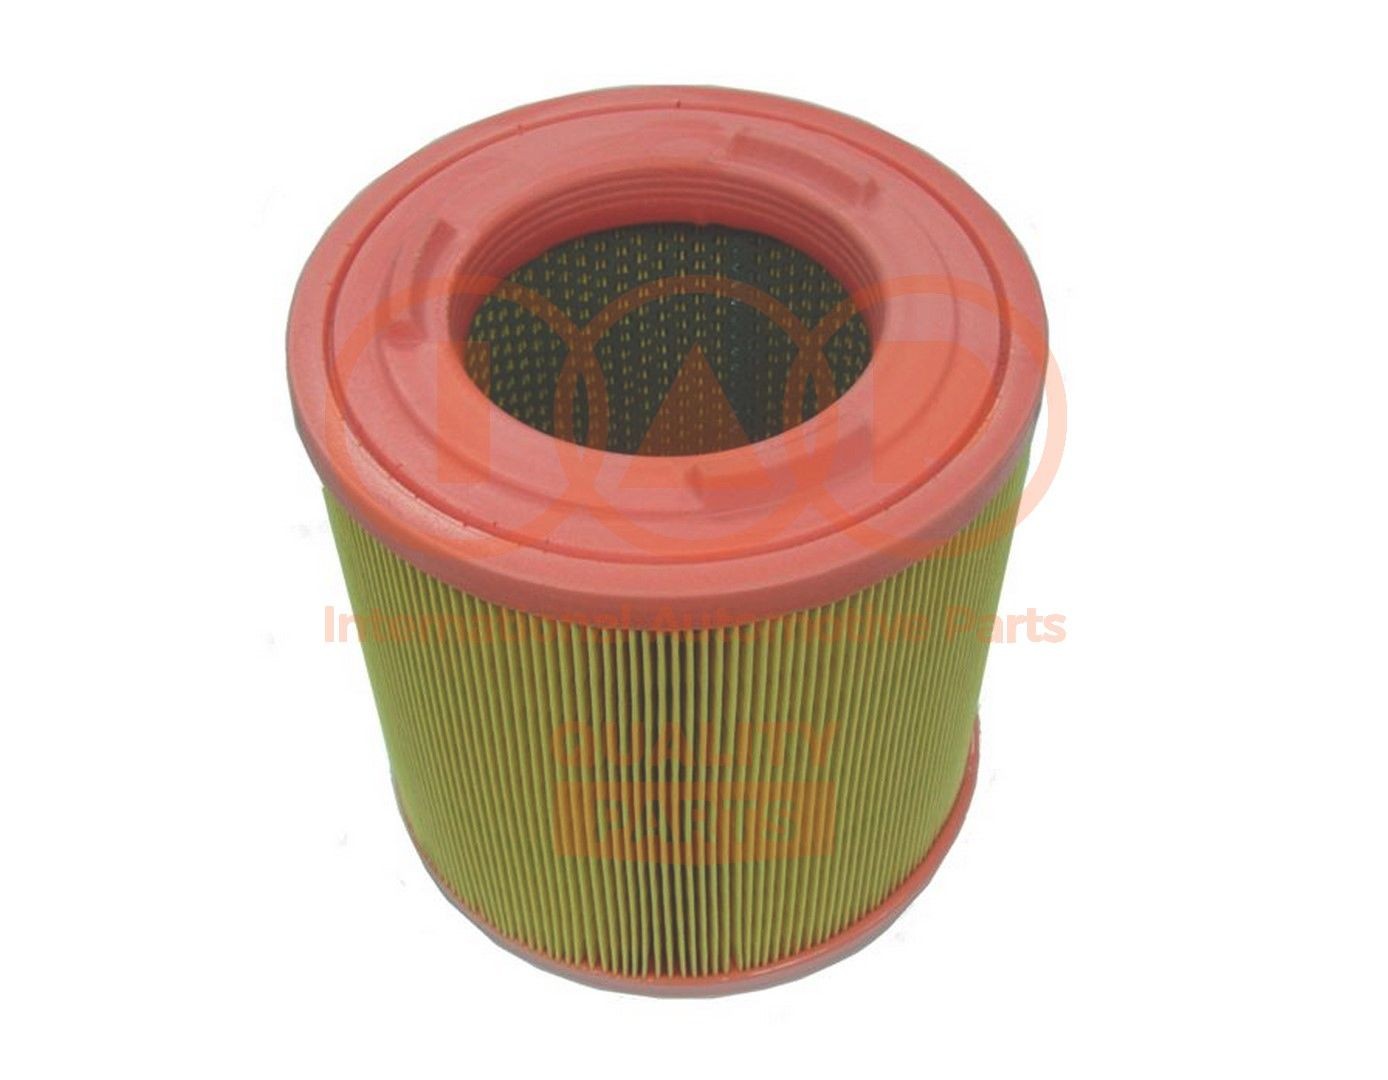 IAP QUALITY PARTS 121-13172 Air filter 185mm, 172mm, Filter Insert